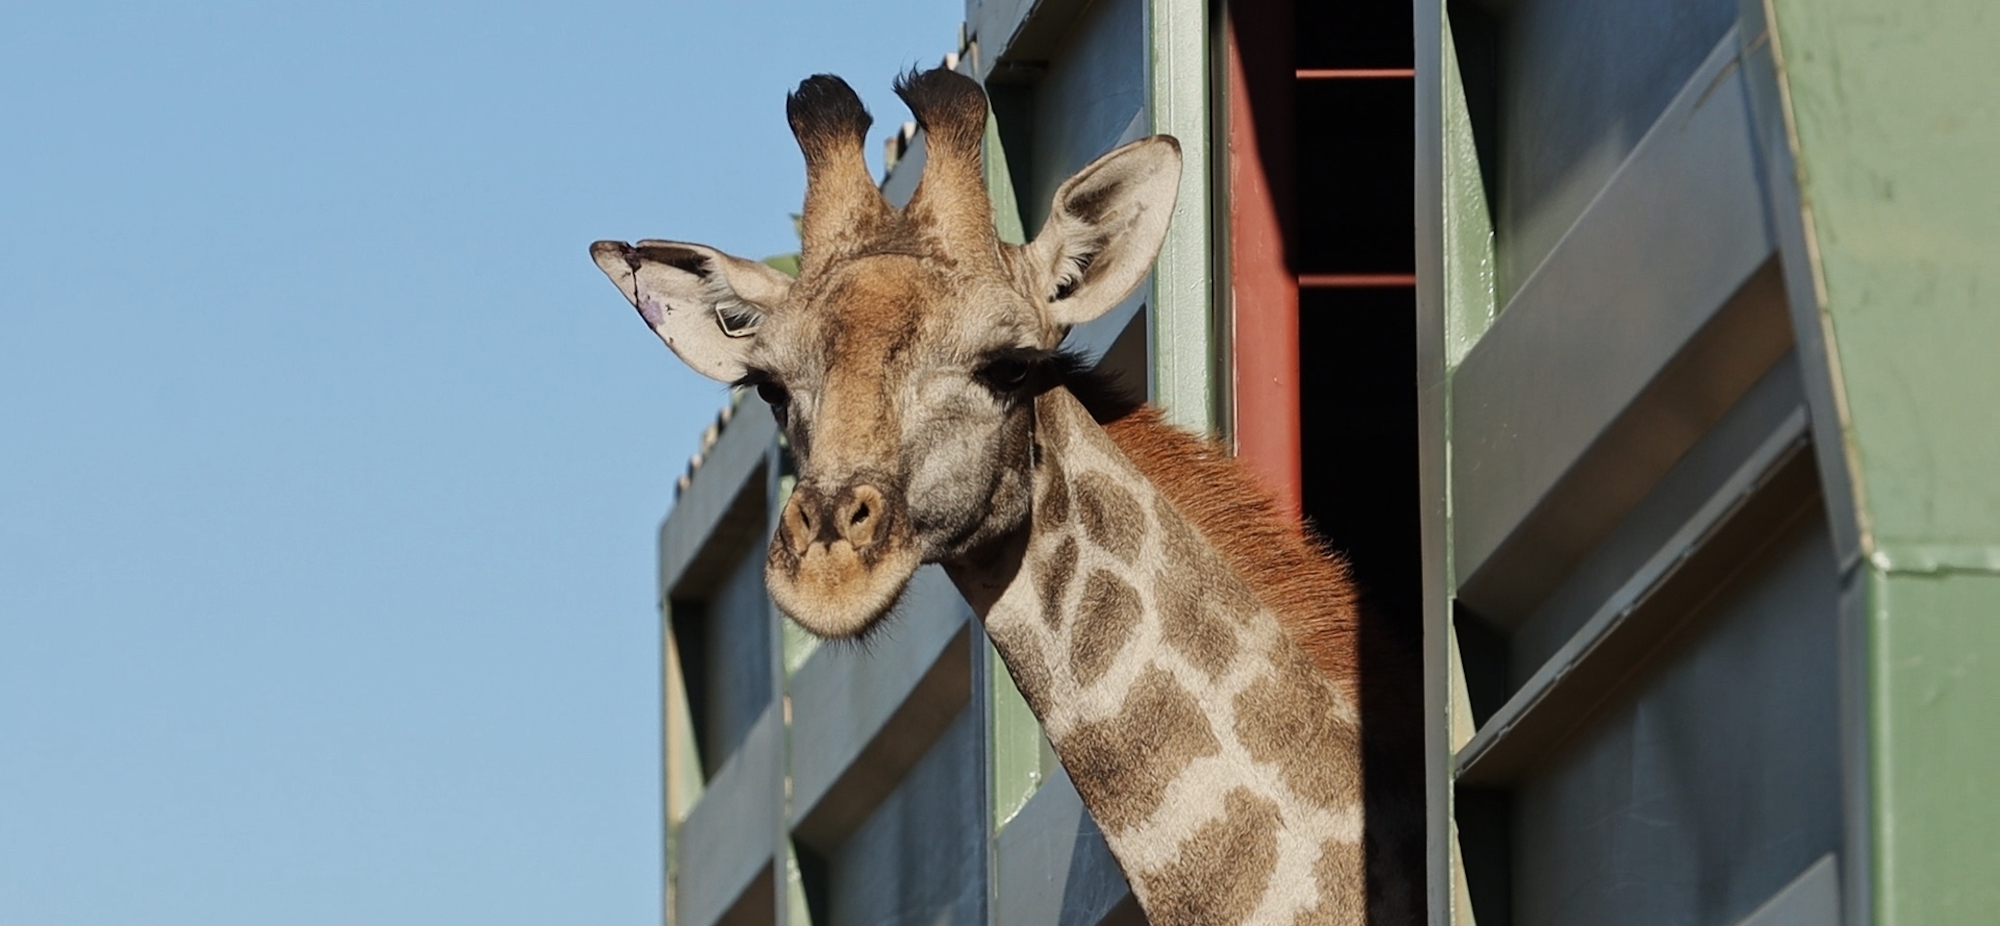 Closeup of a giraffe looking out the side of a capture truck.